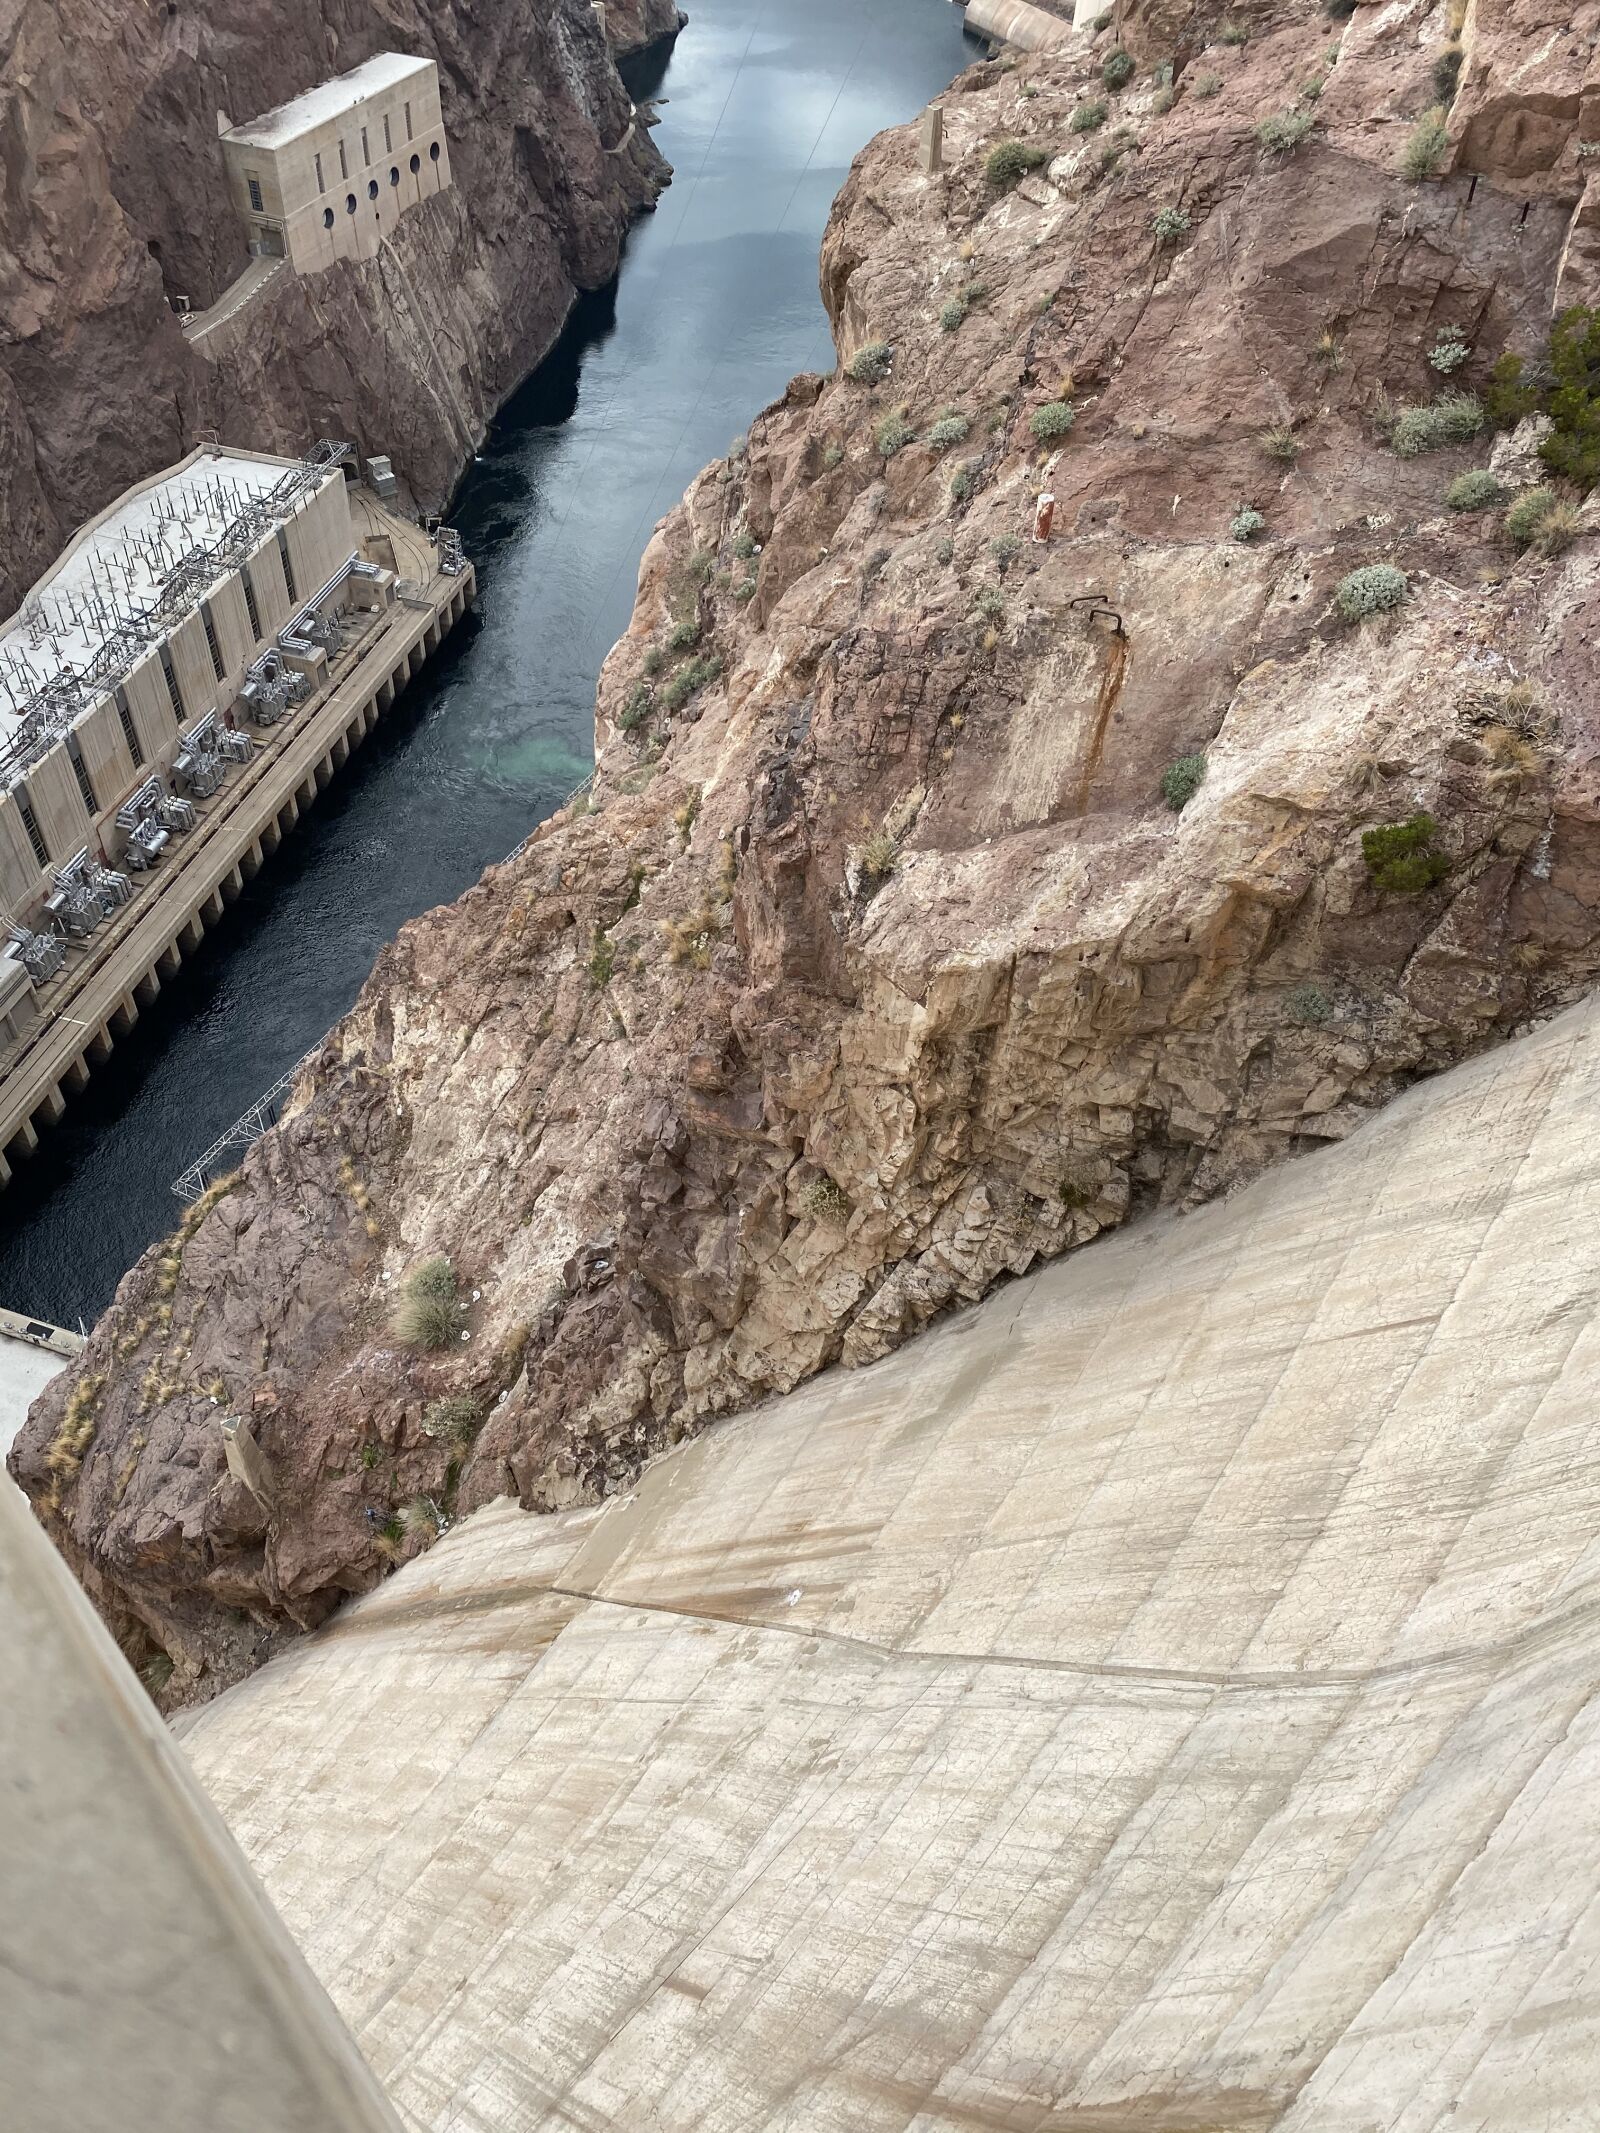 iPhone 11 back dual wide camera 4.25mm f/1.8 sample photo. Hoover dam, famous, bridge photography